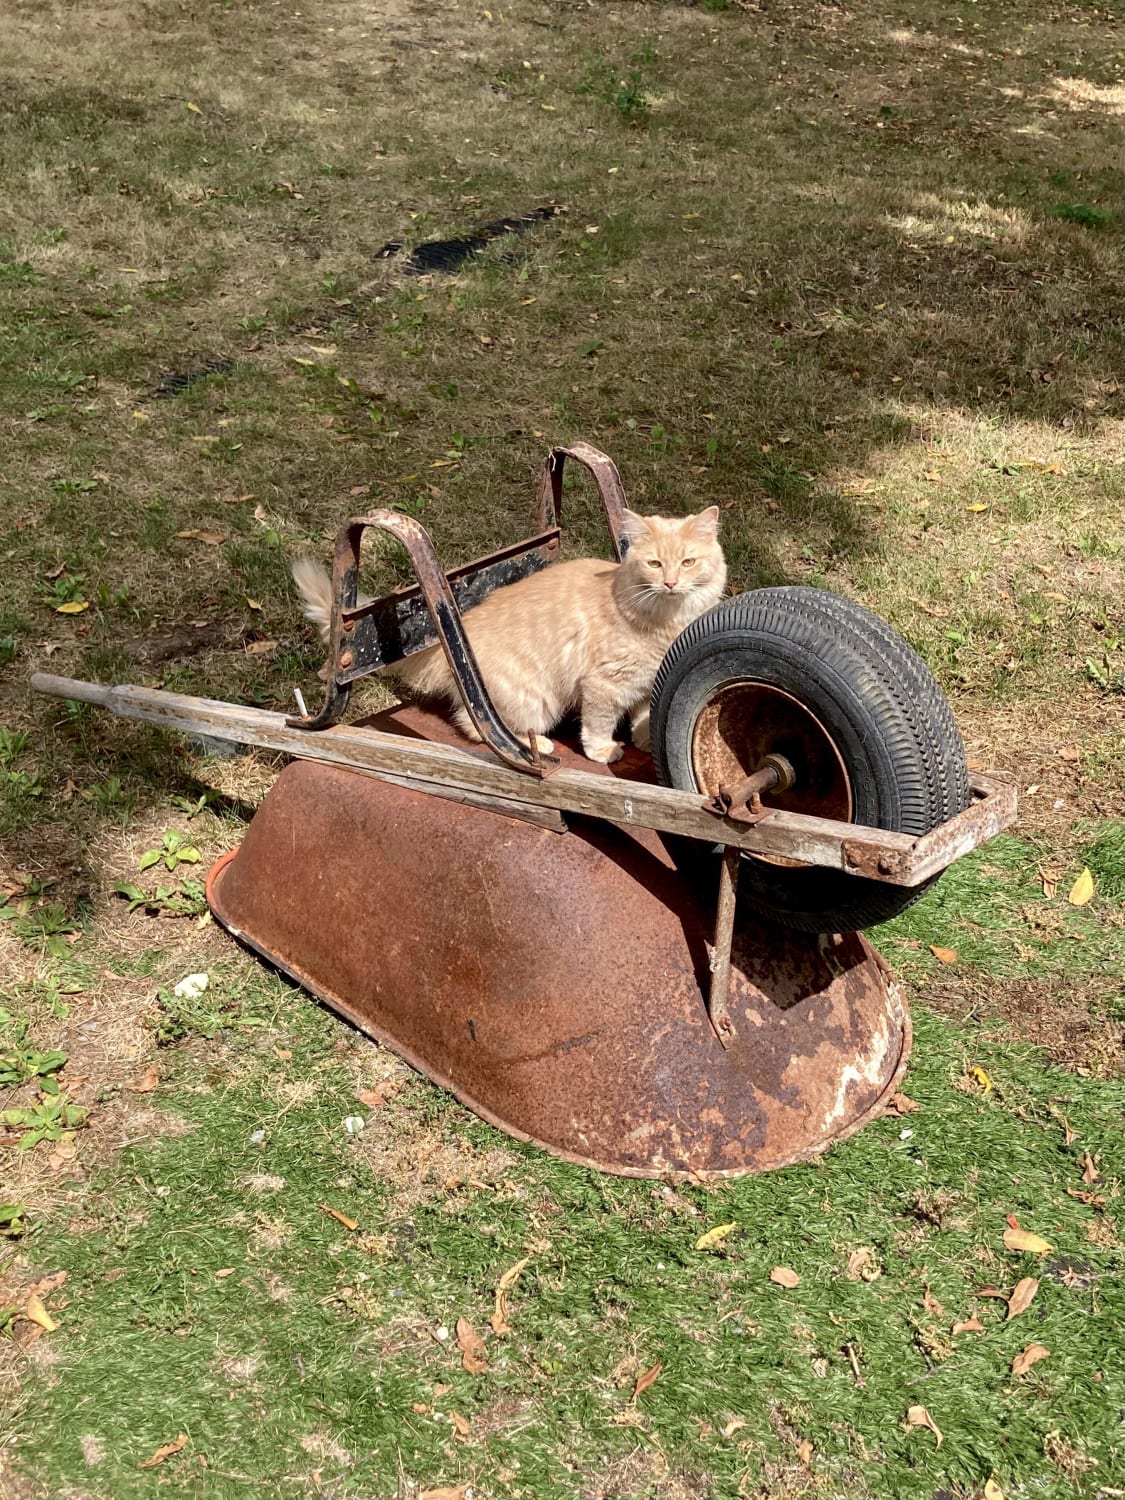 Getting into construction but can’t figure out the wheelbarrow